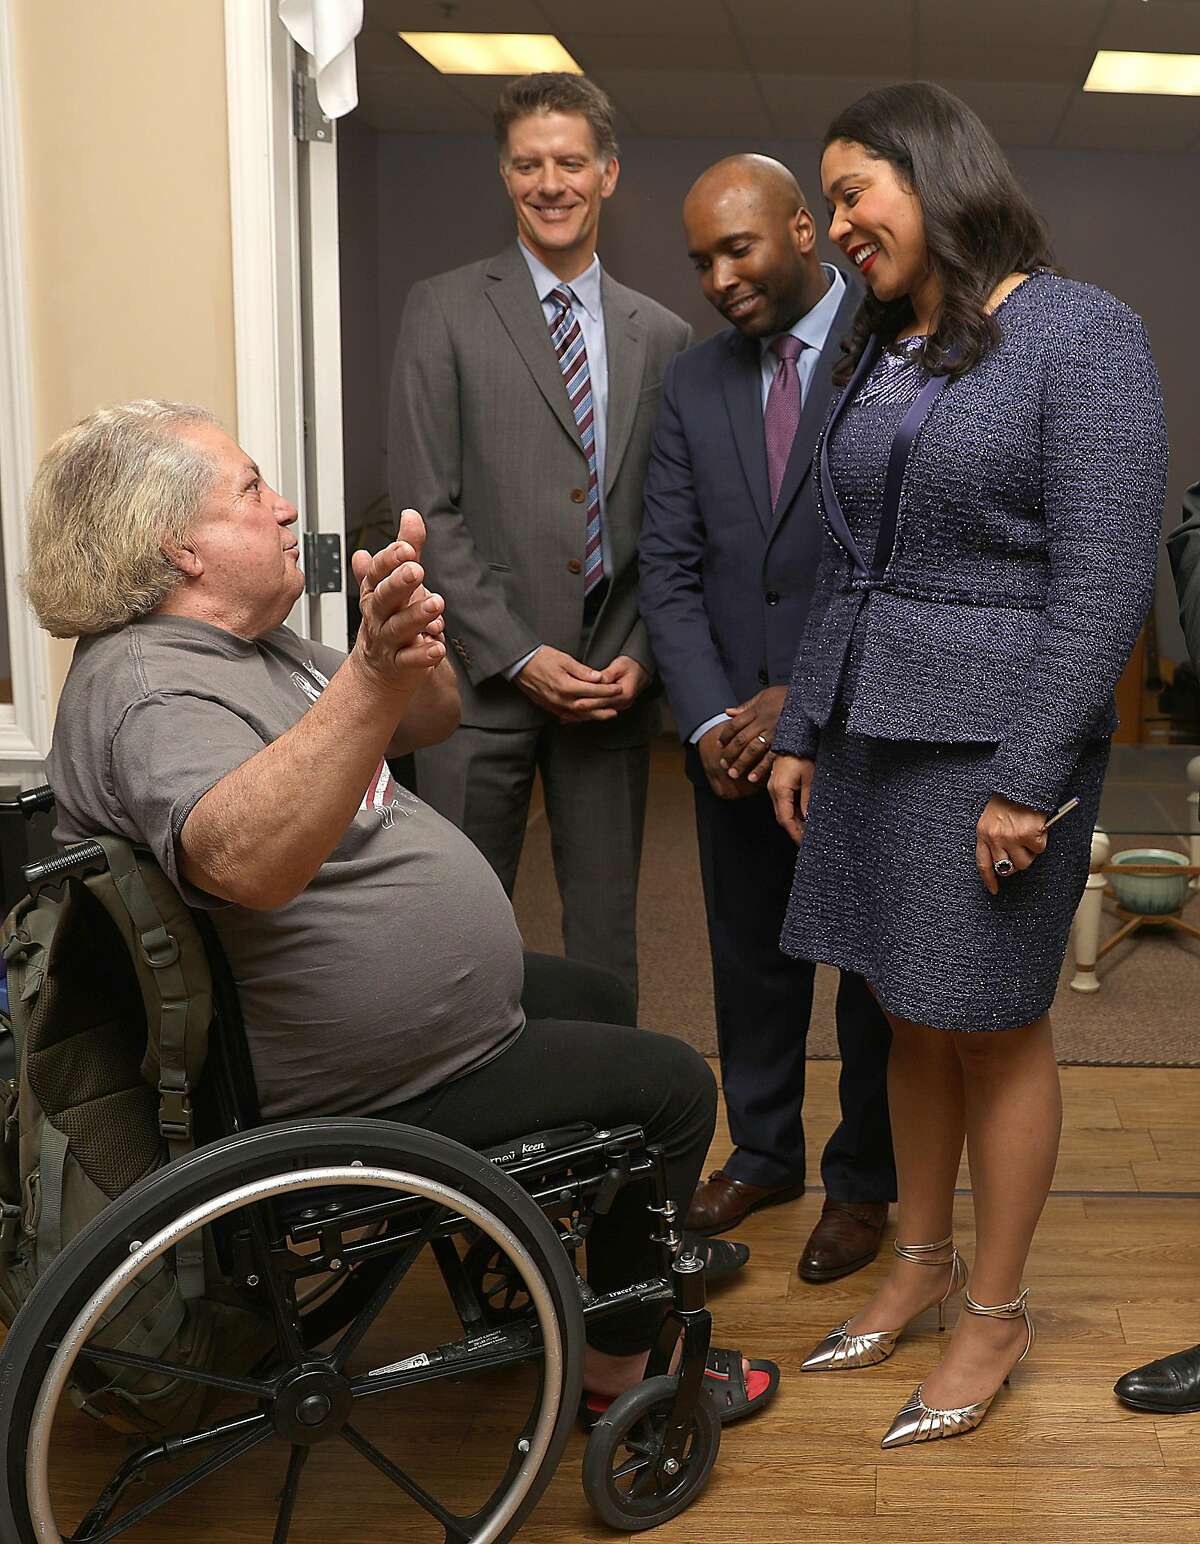 Mayor London Breed (right) appoints Dr. Anton Nigusse Bland (middle right) director of mental health reform and develop a substance use treatment for homeless clients announced at Dore Urgent Care center as they talk with patient Lucio diMauro (left) on Wednesday, March 27, 2019, in San Francisco, Calif. Dr. Grant Cofax (middle left) has recently become San Francisco's director of Health.